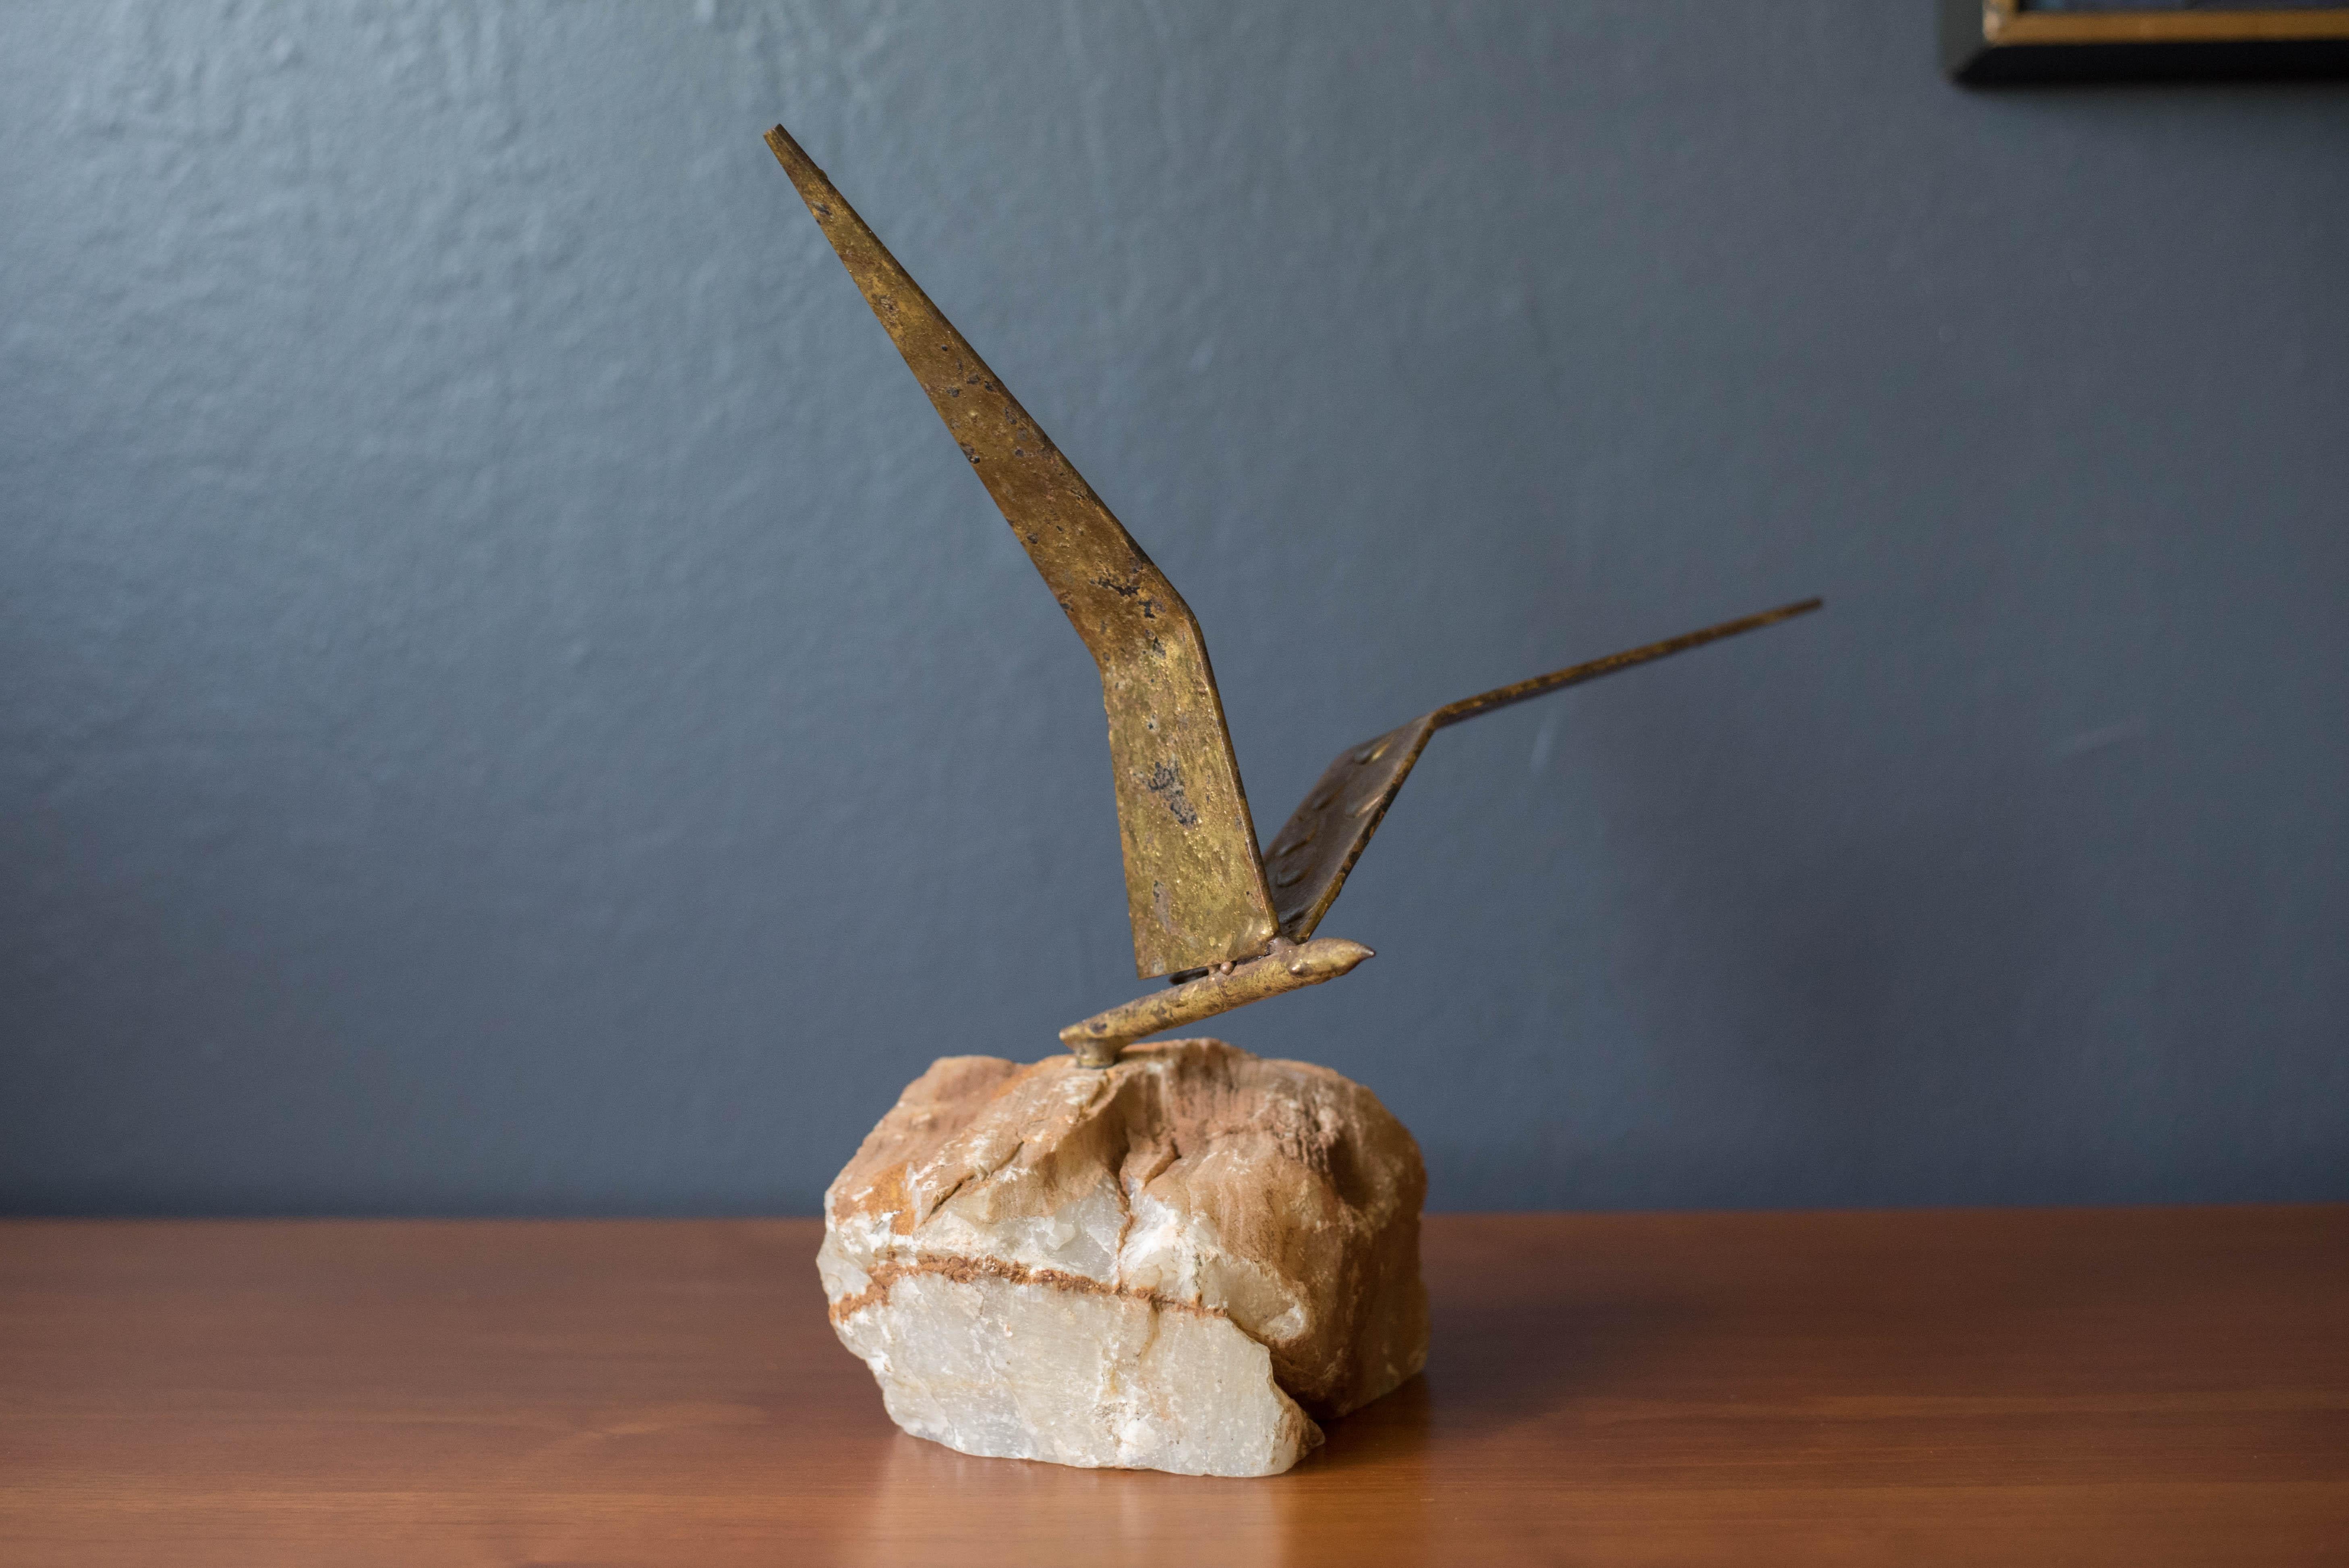 Vintage abstract 'Bird in Flight' sculpture signed C. Jere for Artisan House, circa 1970s. This piece is made of mixed metals with beautifully aged patina and is mounted on a heavy striated stone base. This collector's art piece is perfect for